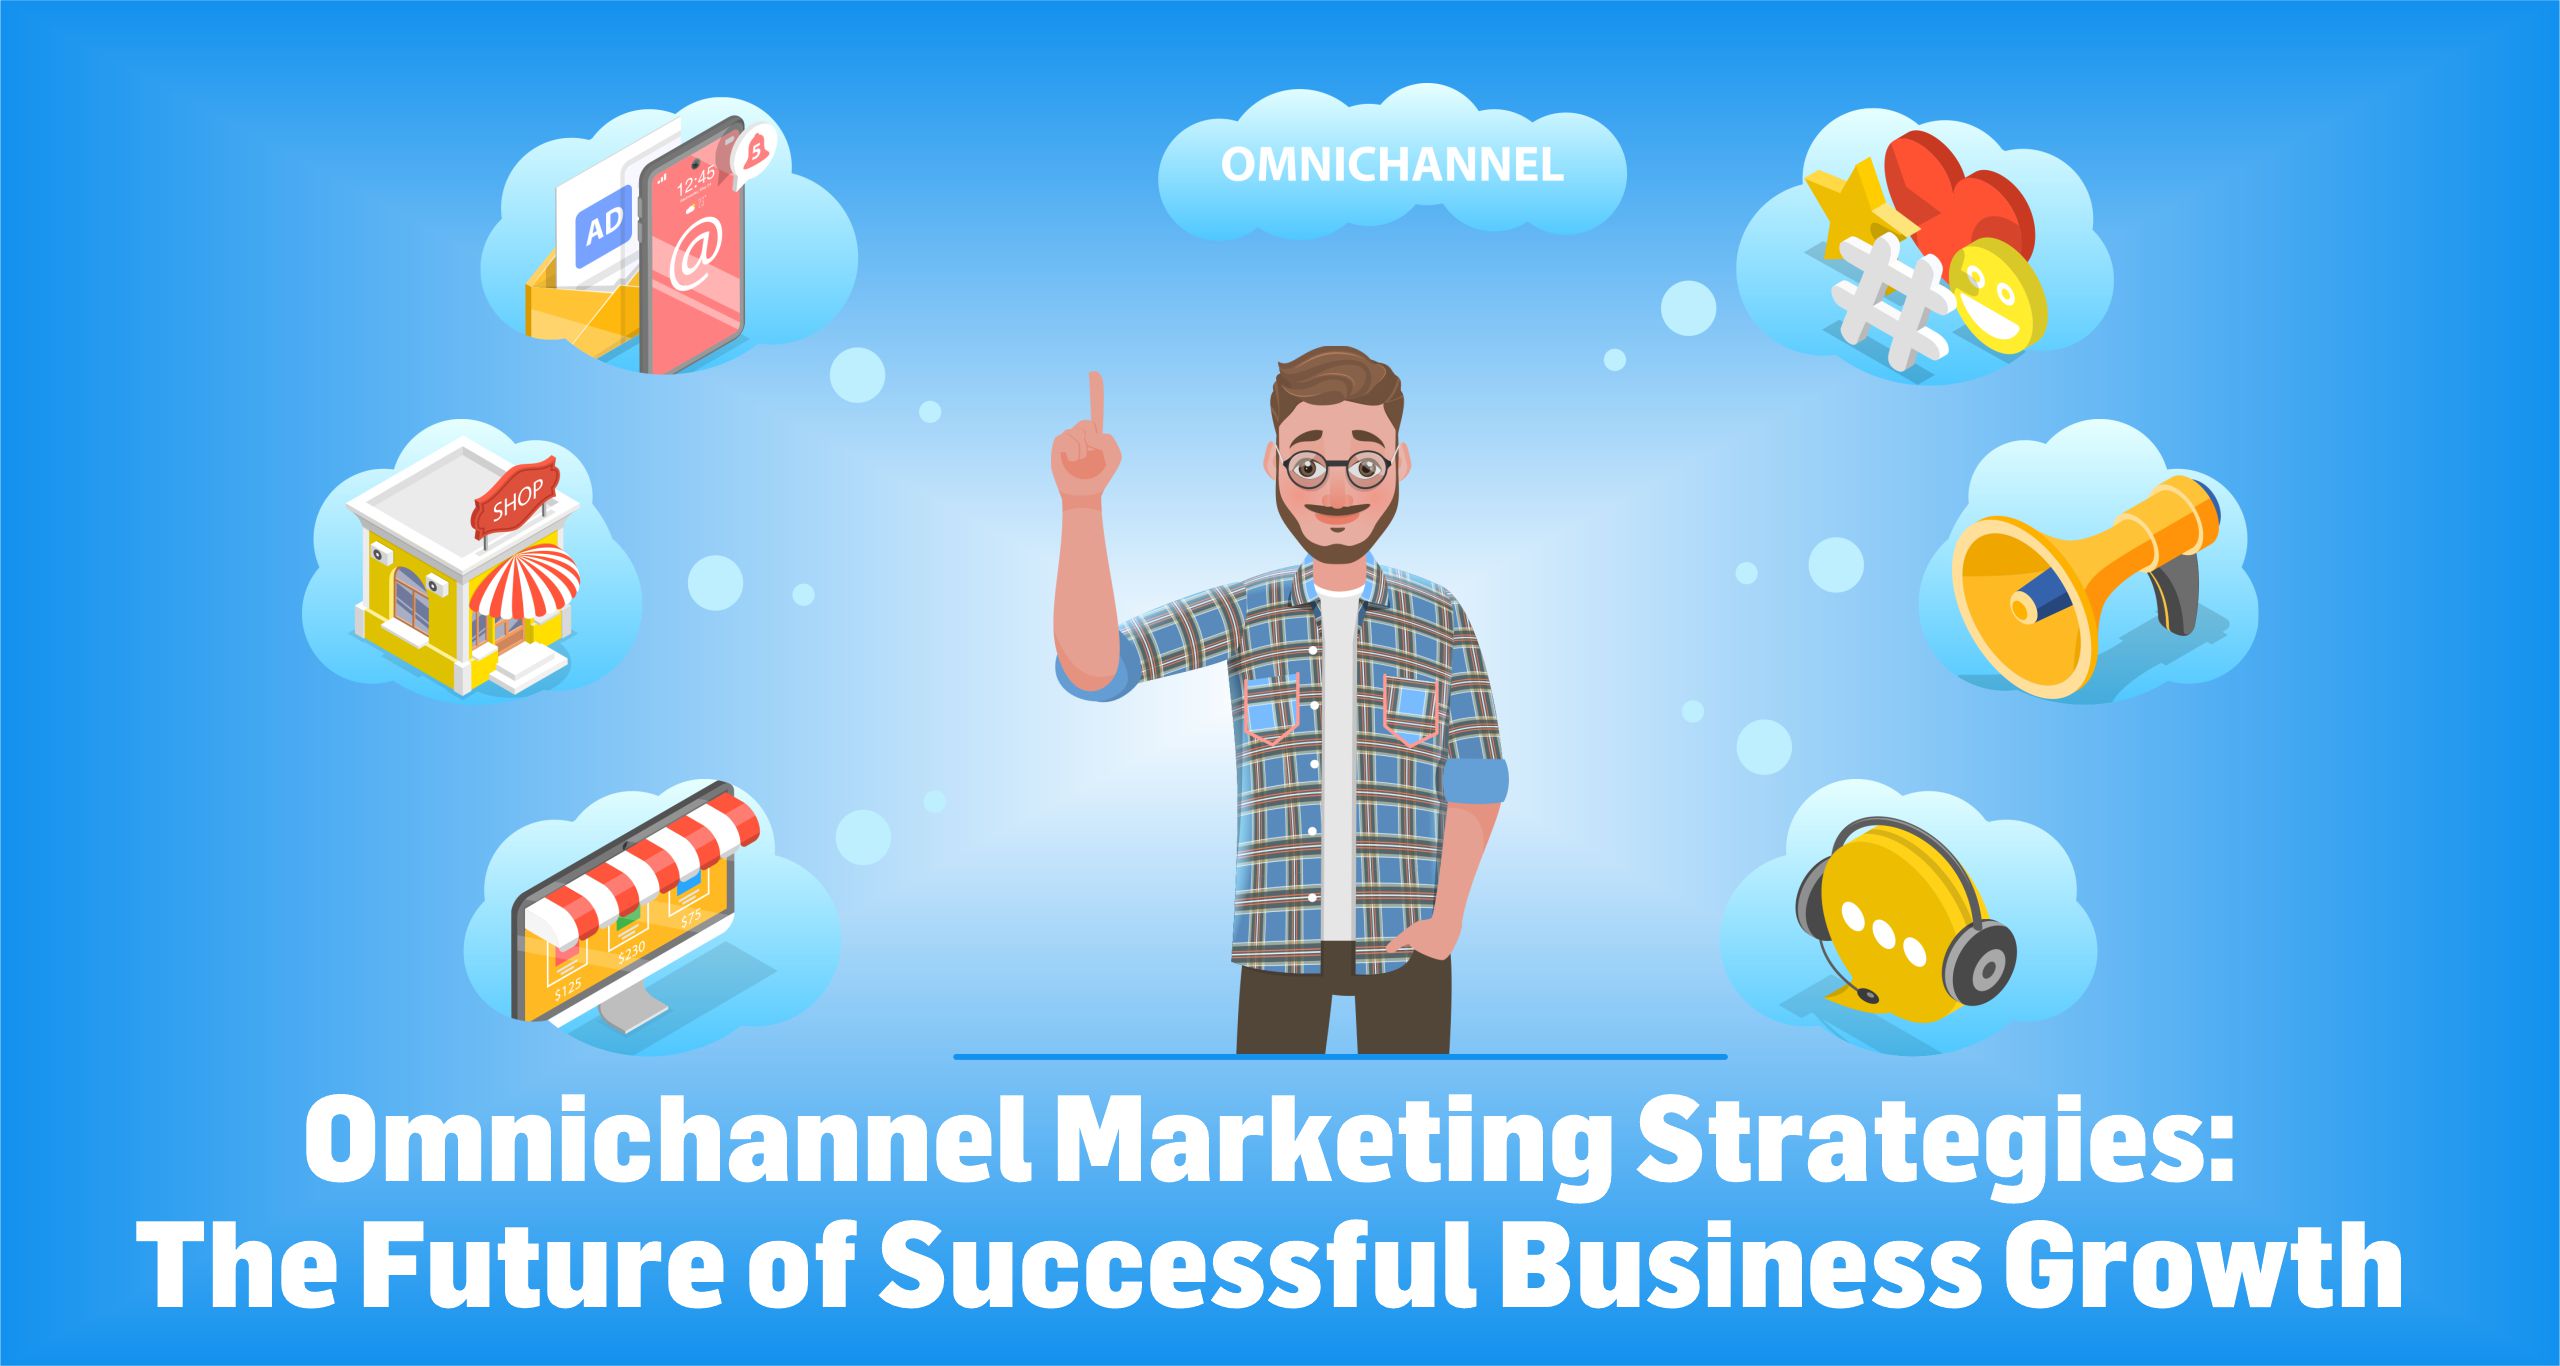 Omnichannel Marketing Strategies The Future of Successful Business Growth